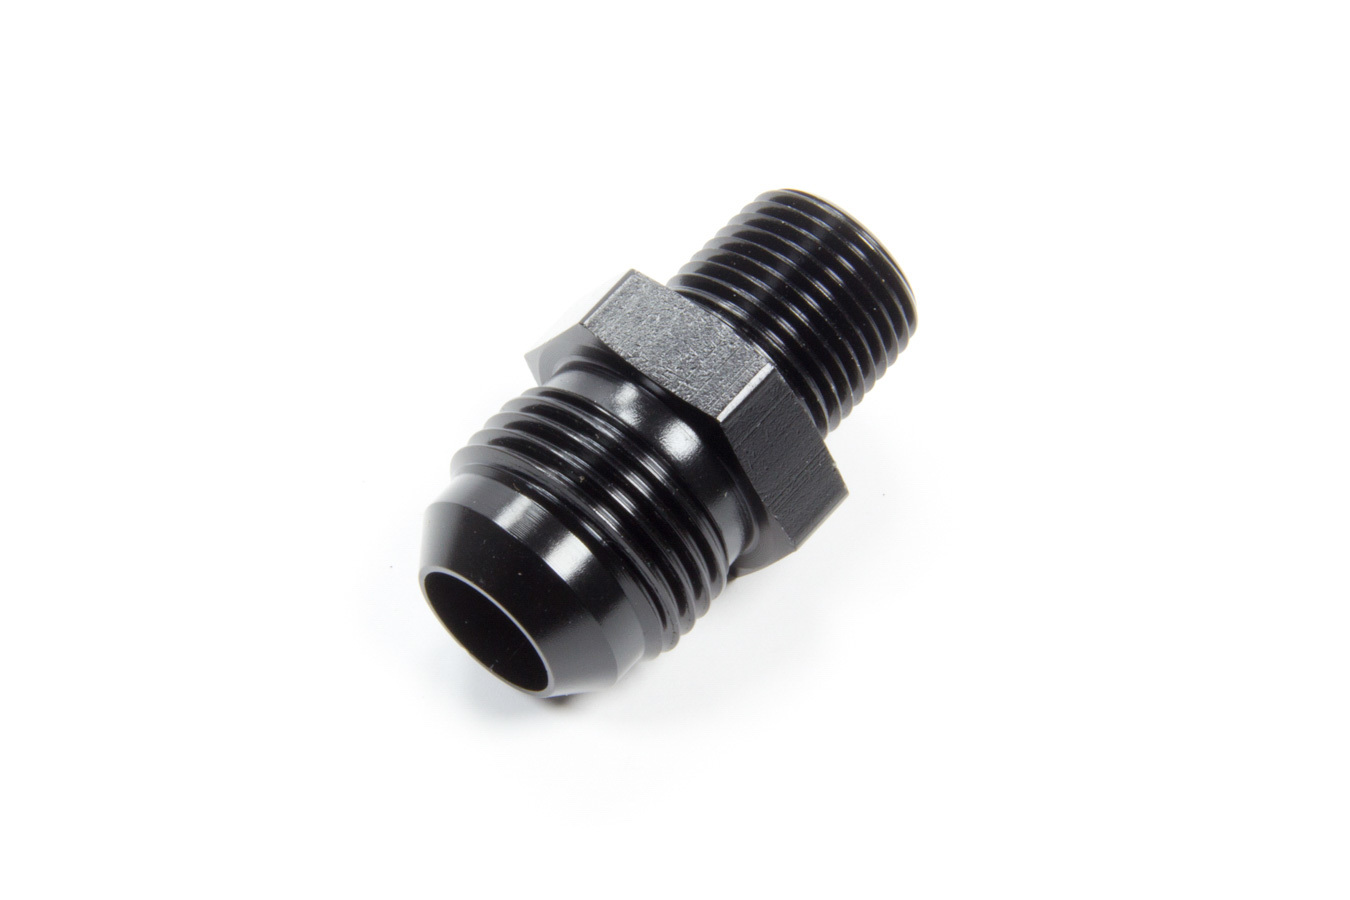 Aeroquip FCM5185 Fitting, Adapter, Straight, 10 AN Male to 3/8 in NPT Male, Aluminum, Black Anodized, Each